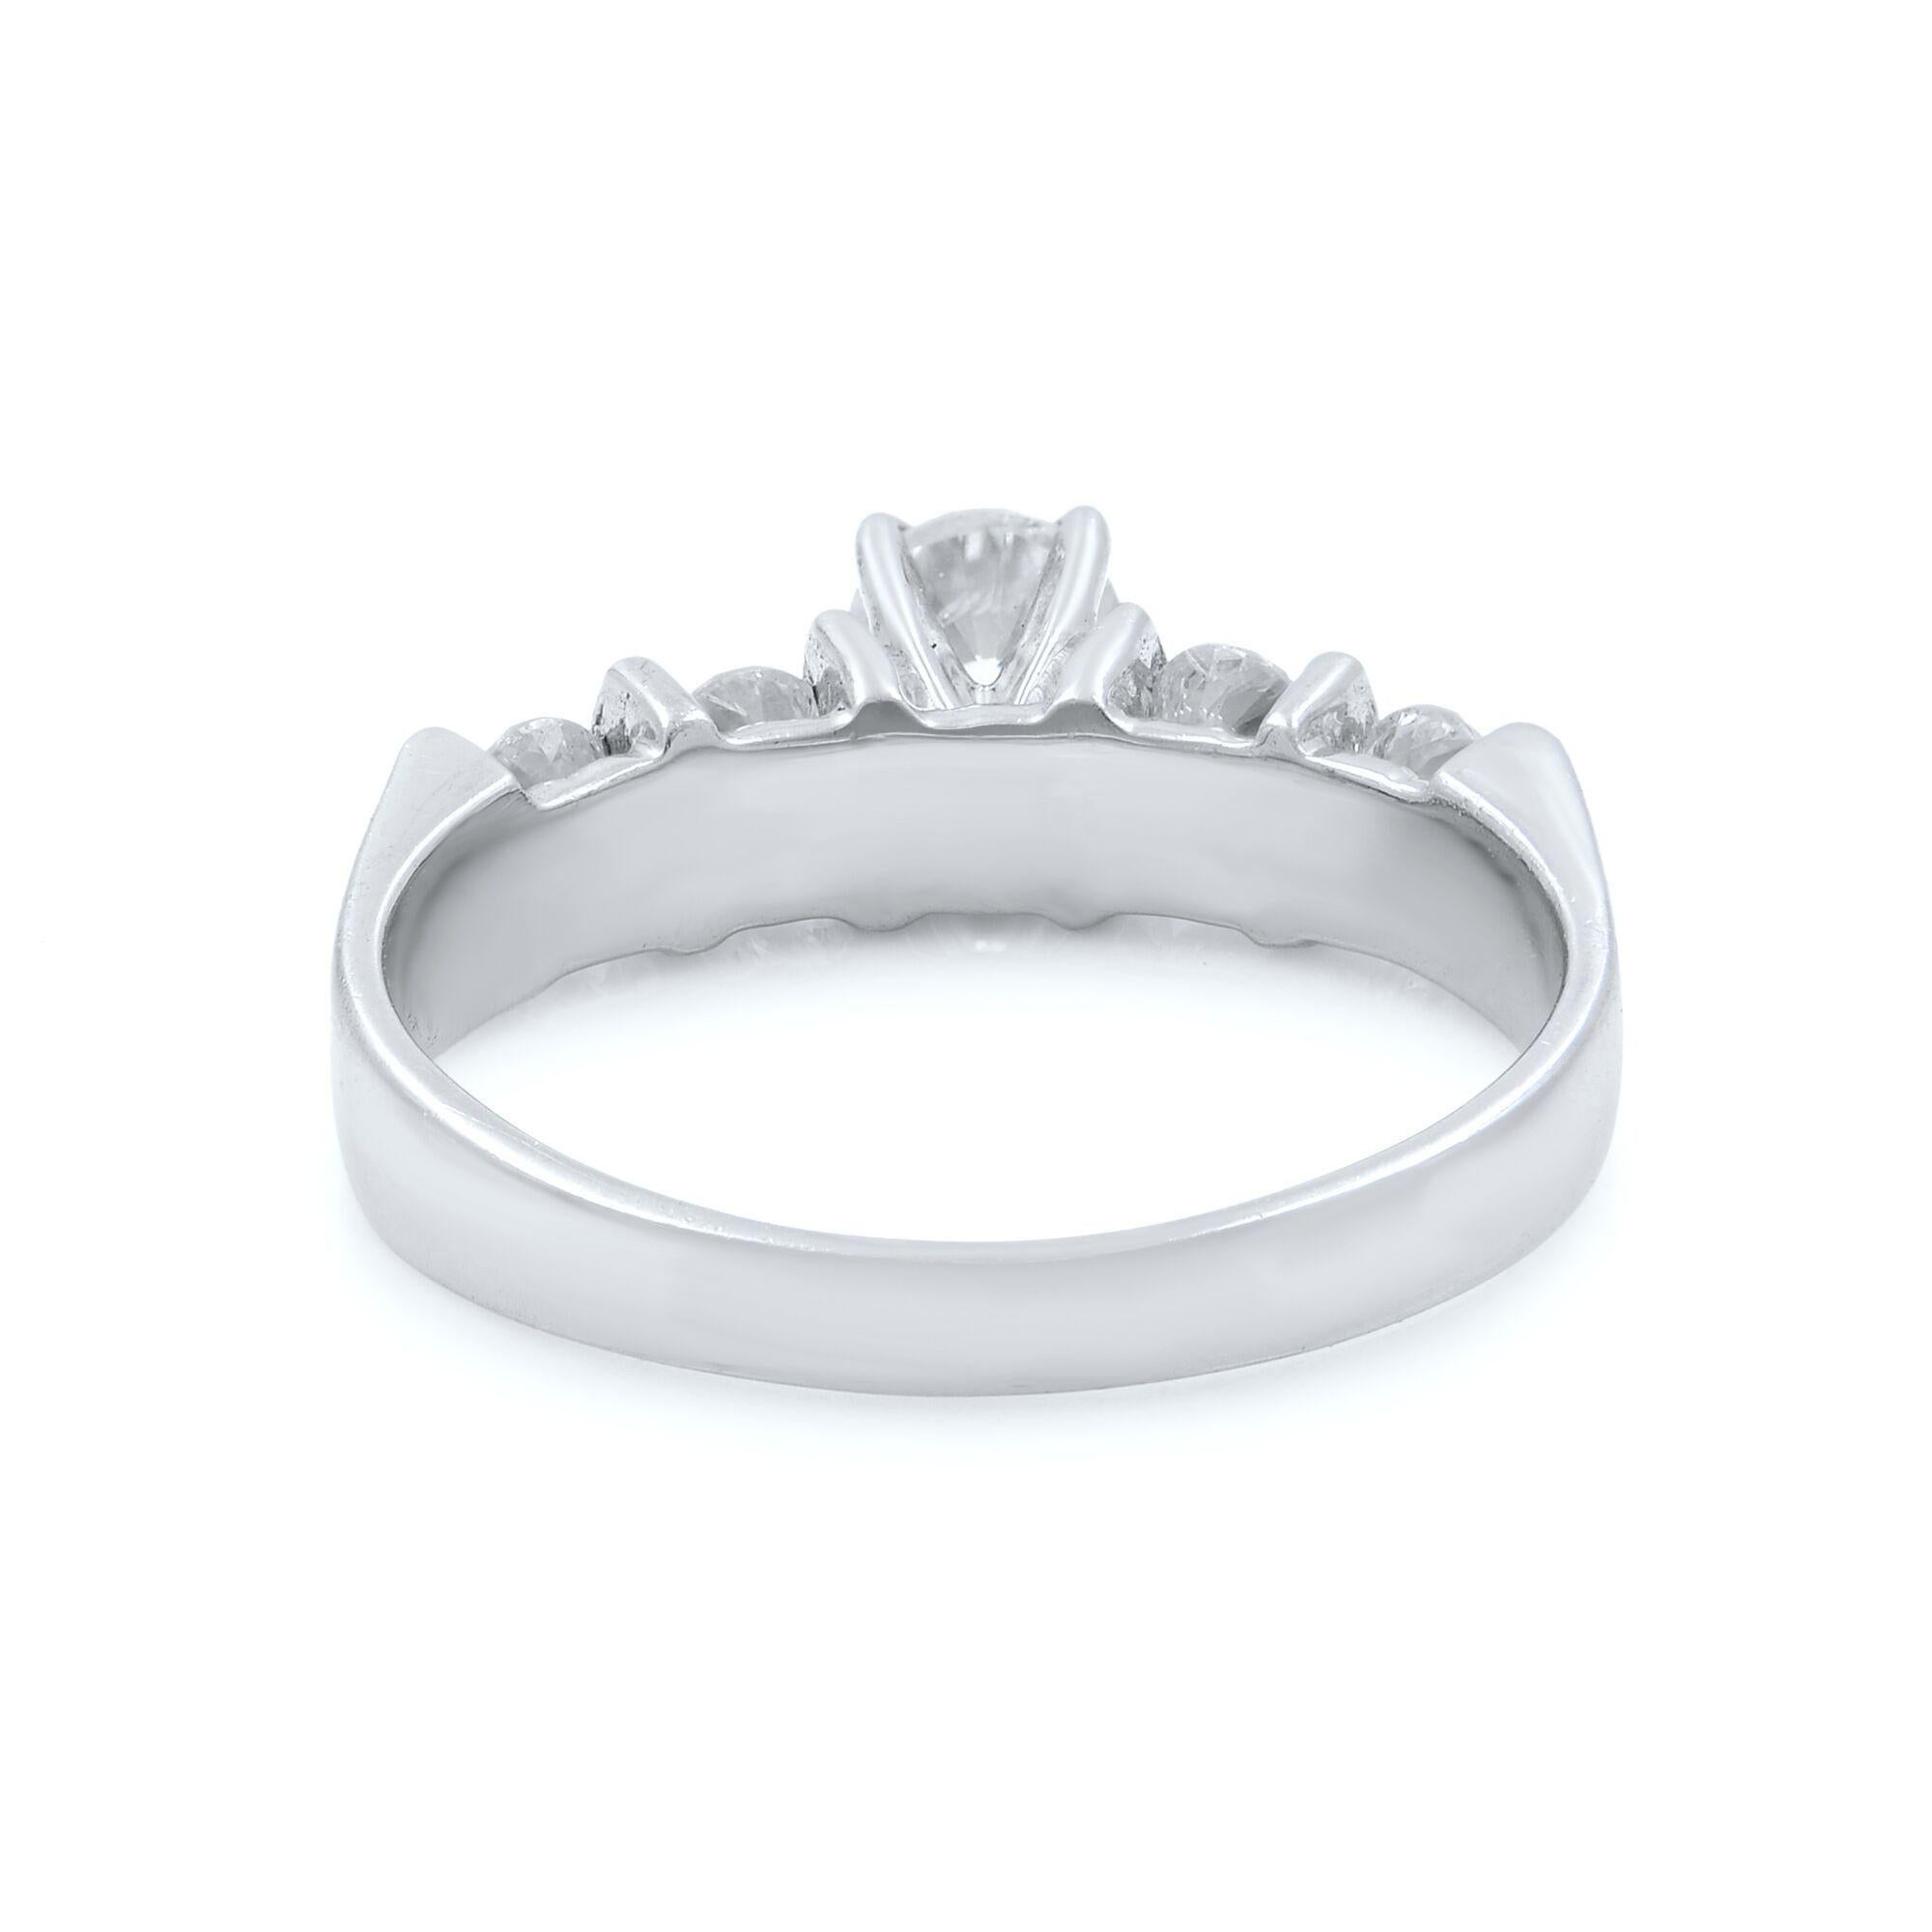 This beautiful diamond engagement ring is crafted in 14K white gold. It features a center round cut diamond with 4 round cut diamond accents. Total diamond weight: 0.86ct. Ring size 7. Total weight: 4.3 gms. Comes with a presentable gift box and an